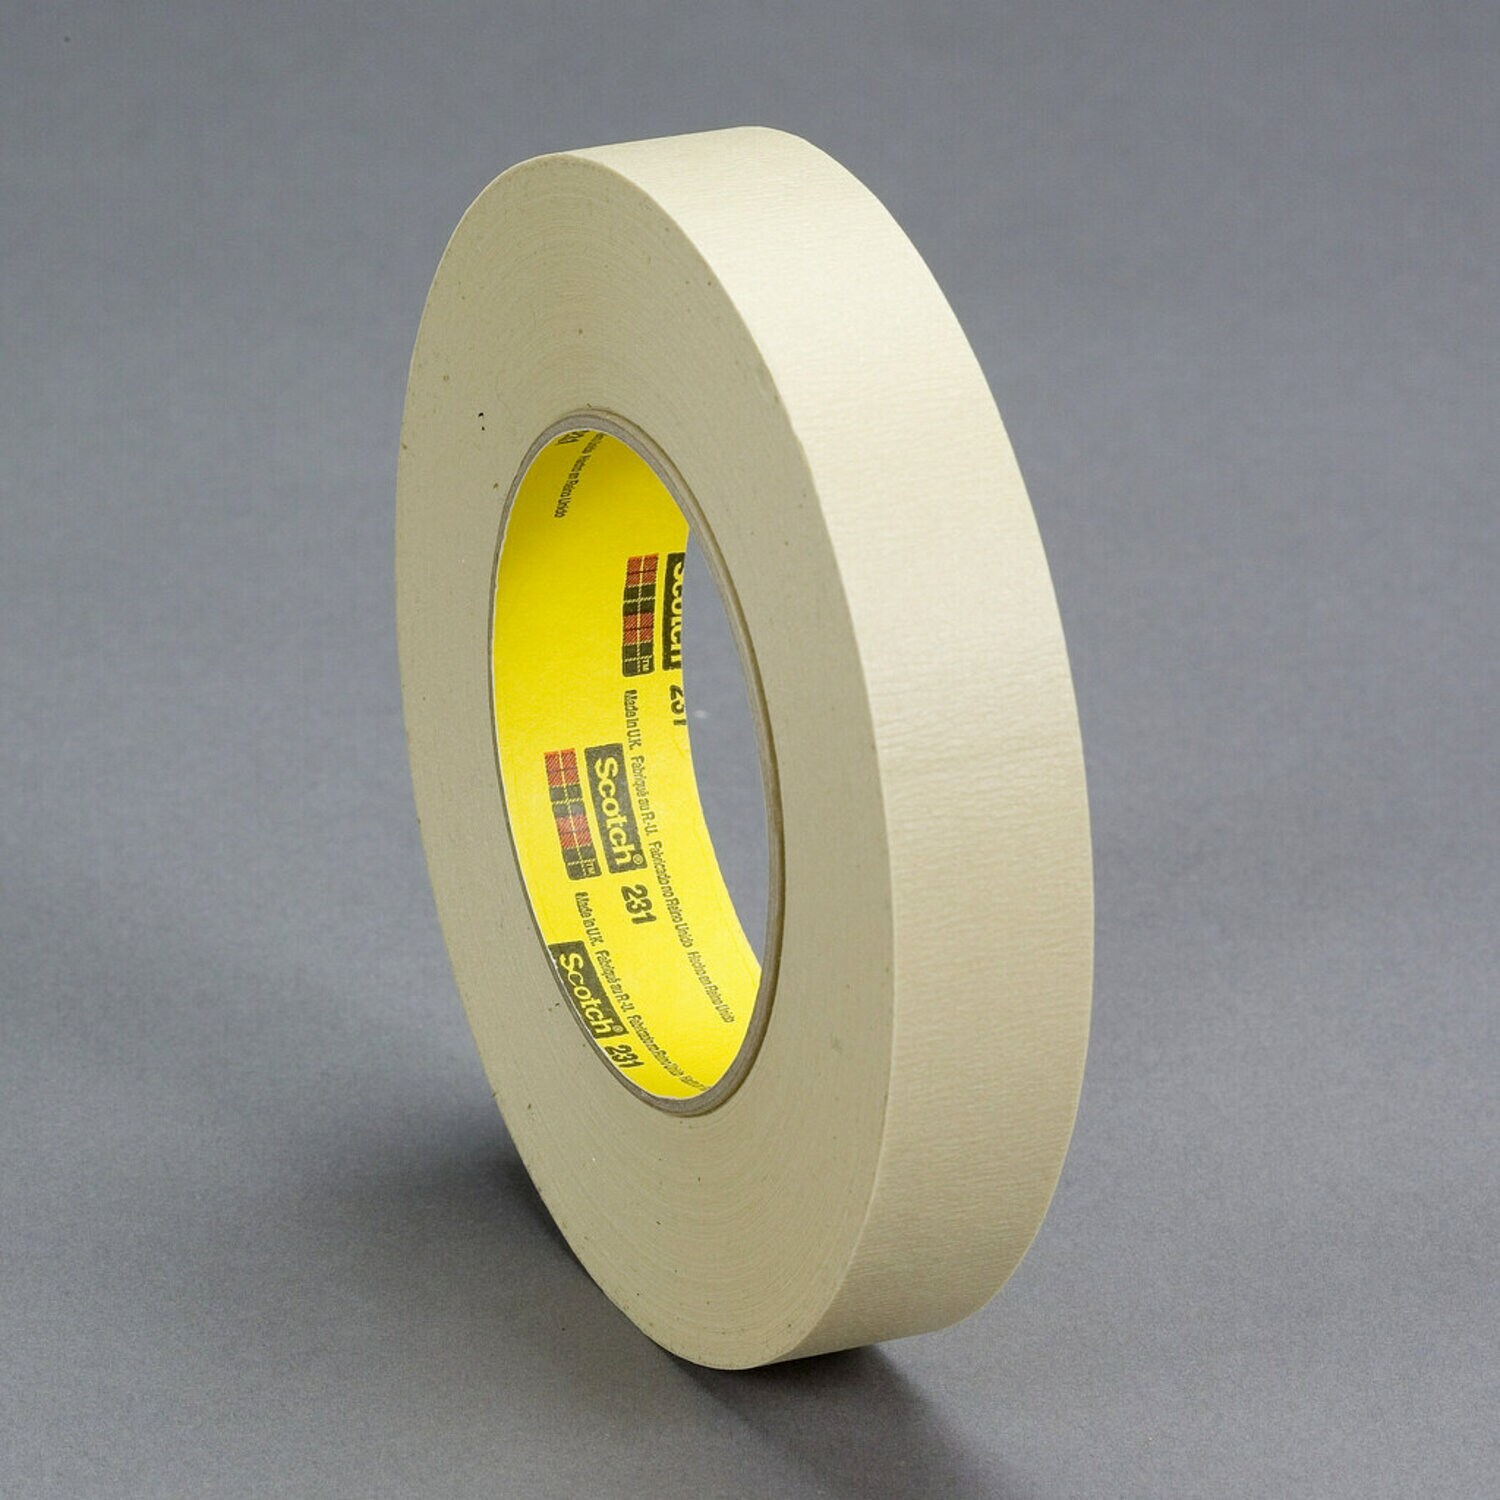 7010295786  3M Paint Masking Tape 231/231A, Tan, 3-1/4 in x 60 yd